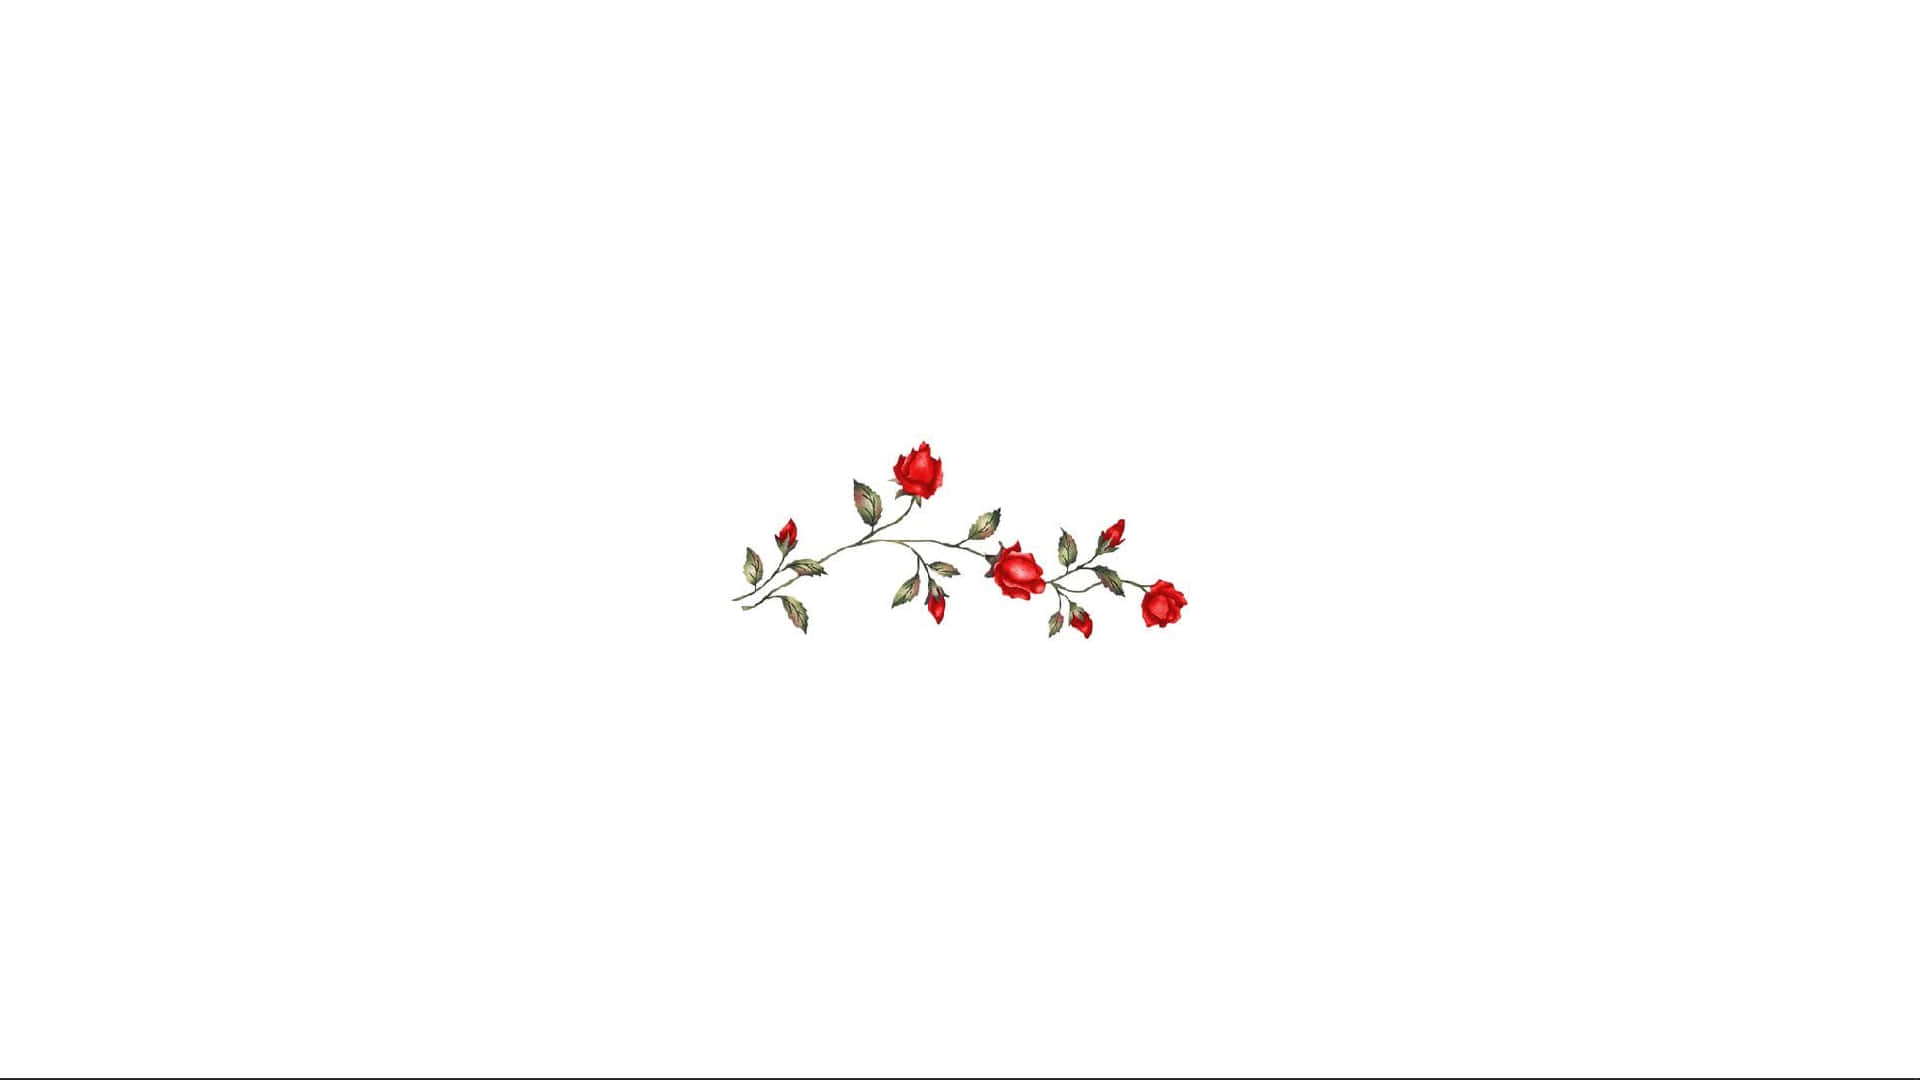 A Red Flower With Leaves On A White Background Wallpaper